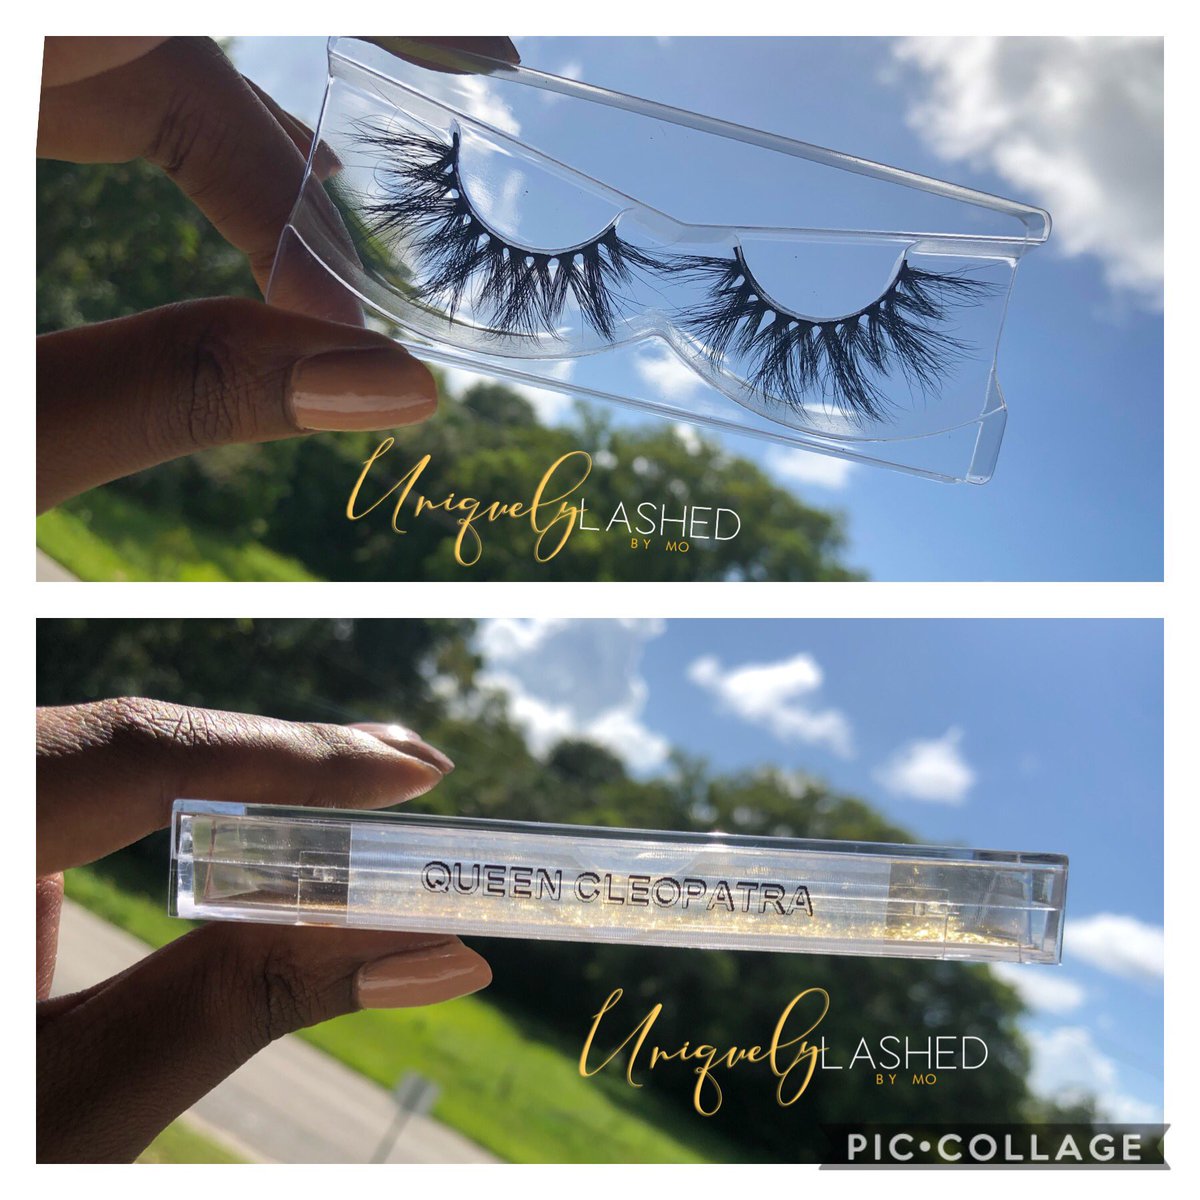 🚨 NEW ITEM 🚨 

•Lash Style: 3D 16mm 100% Minks
•Lash Name: Queen Cleopatra 
•Price: $12

✨High Quality✨Reusable✨Unique

You don’t wanna miss out on these affordable stylish eyelashes 🤩✨💛.

#LashedByMo #UniquelyLashed  #3DMinks #QualityLashes #YouNameIt #ILashIt